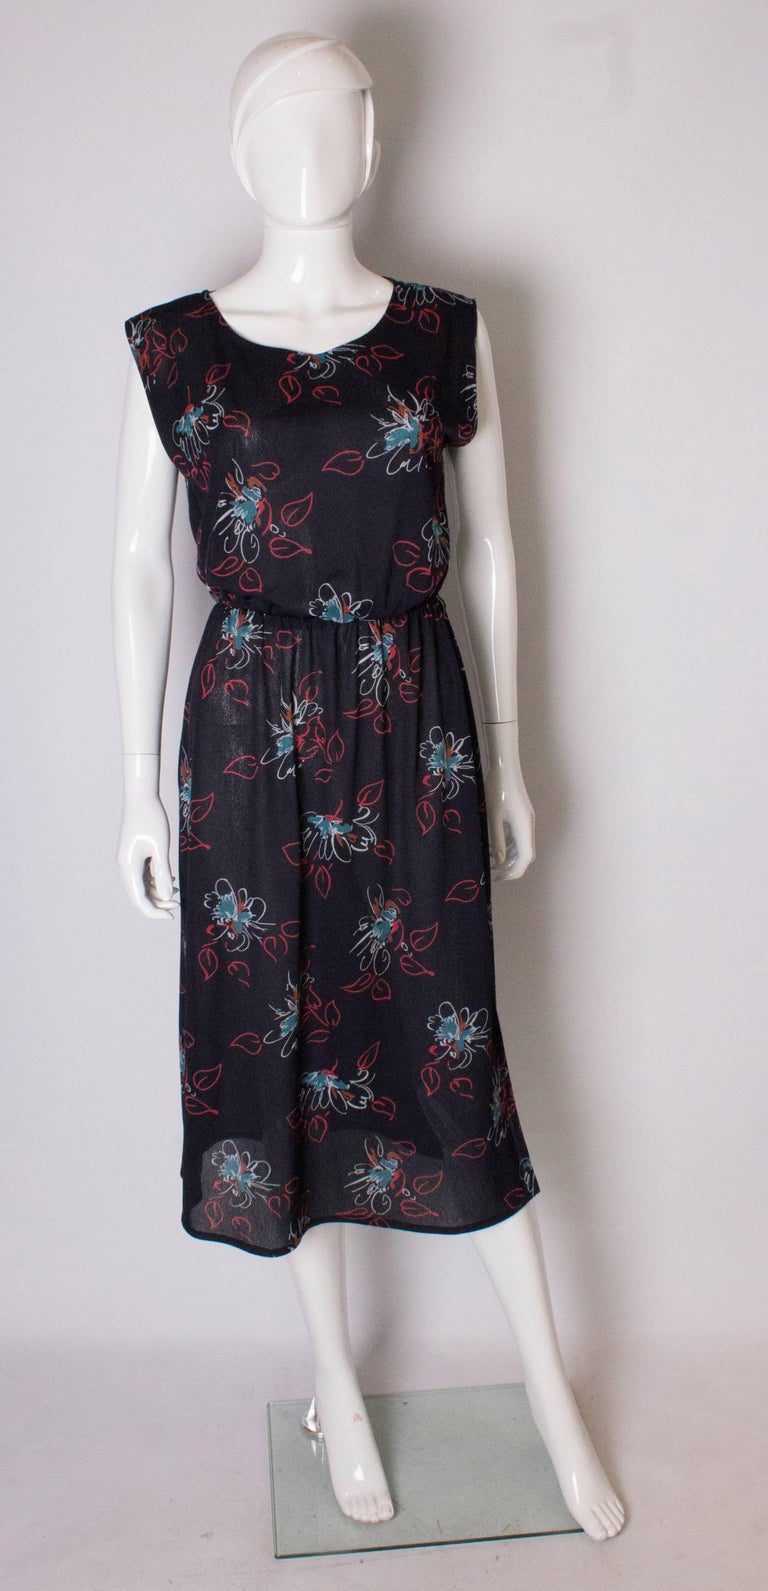 A vintage 1970s abstract floral printed Shift day Dress For Sale at 1stDibs